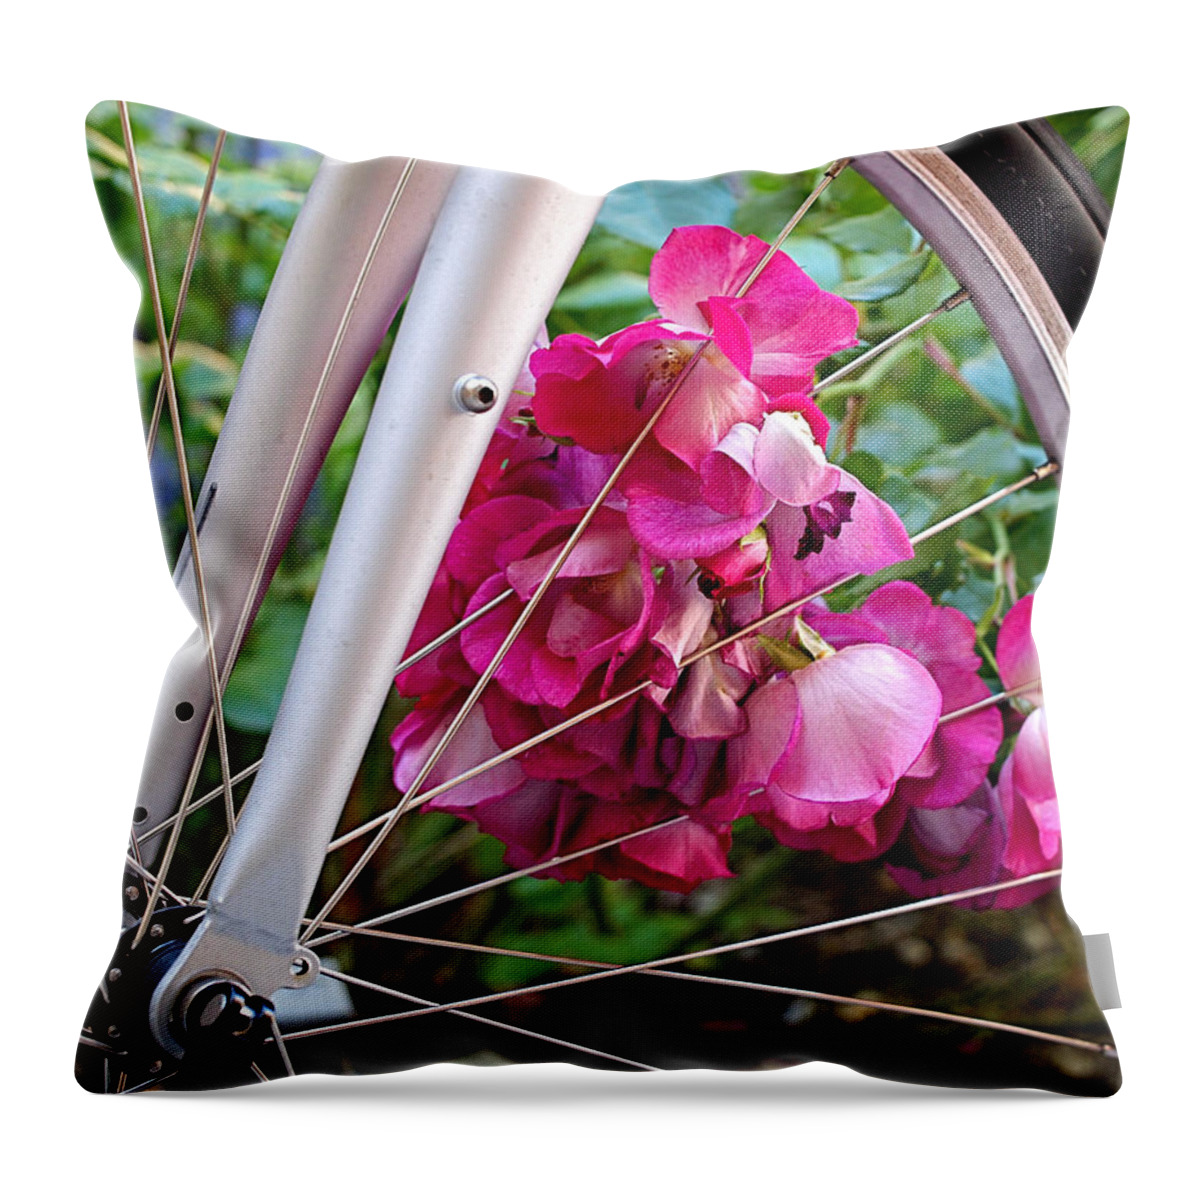 Bicycle Throw Pillow featuring the photograph Bespoke Flower Arrangement by Rona Black